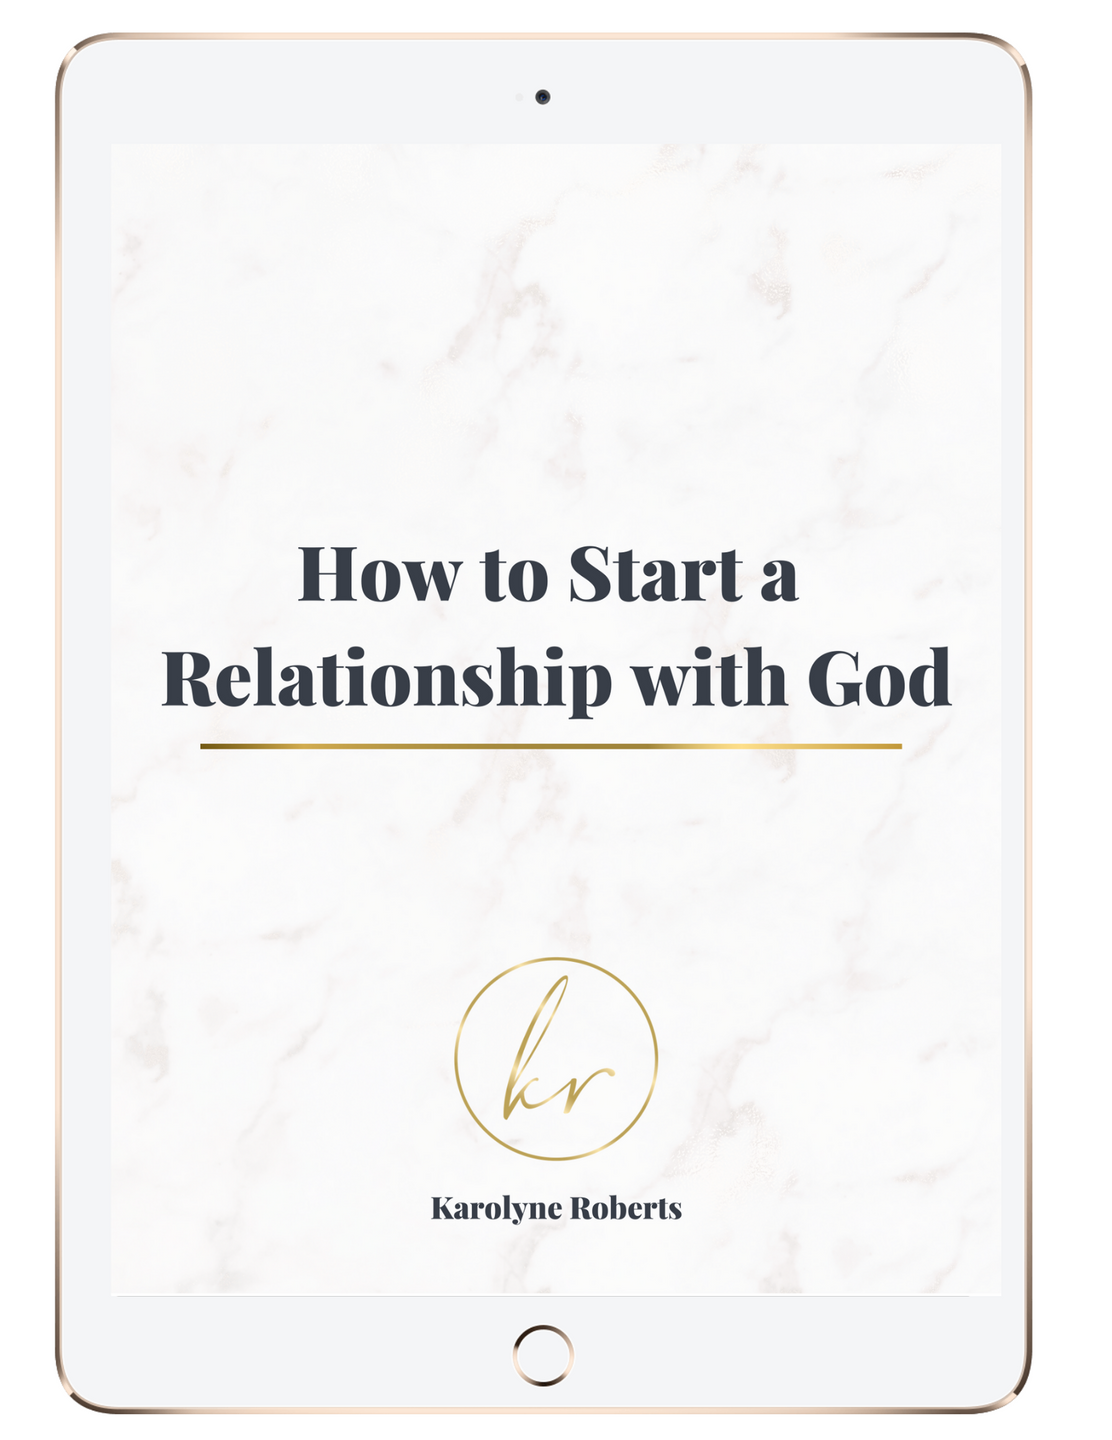 How to Start a Relationship with God